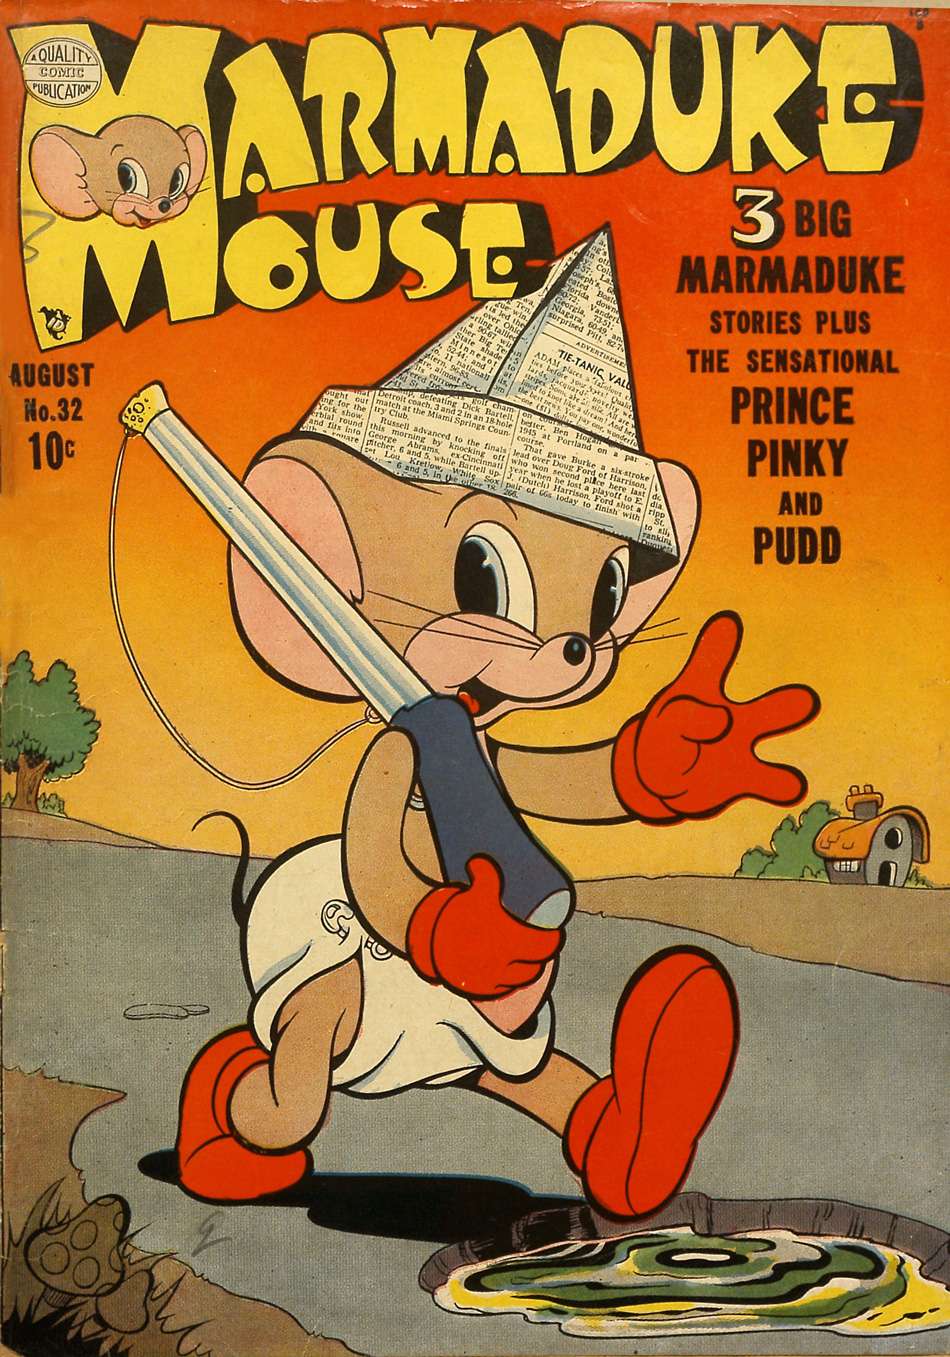 Book Cover For Marmaduke Mouse 32